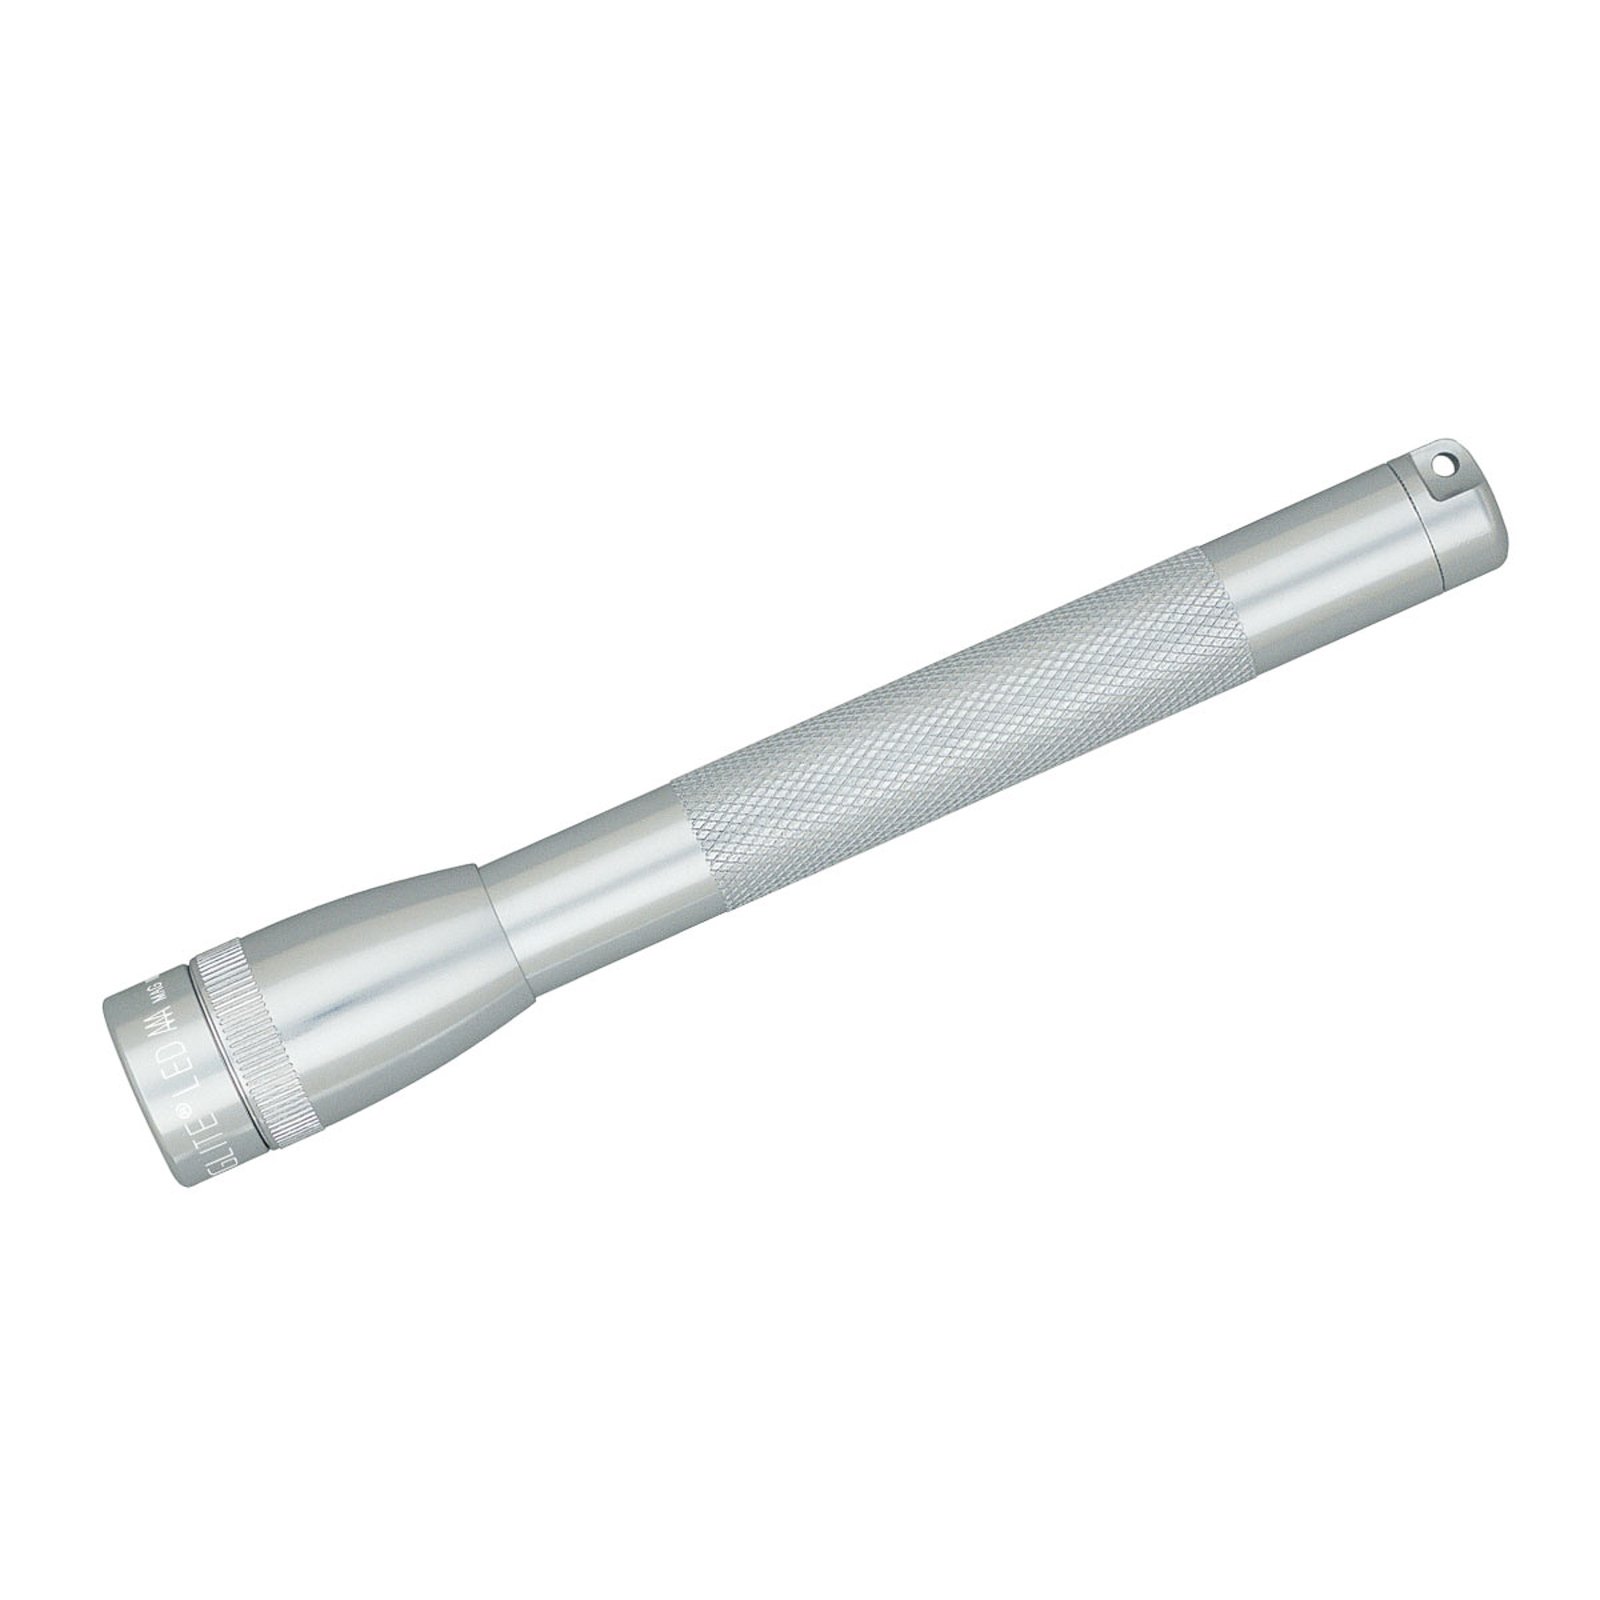 Maglite LED zaklamp Mini, 2 Cell AAA, zilver